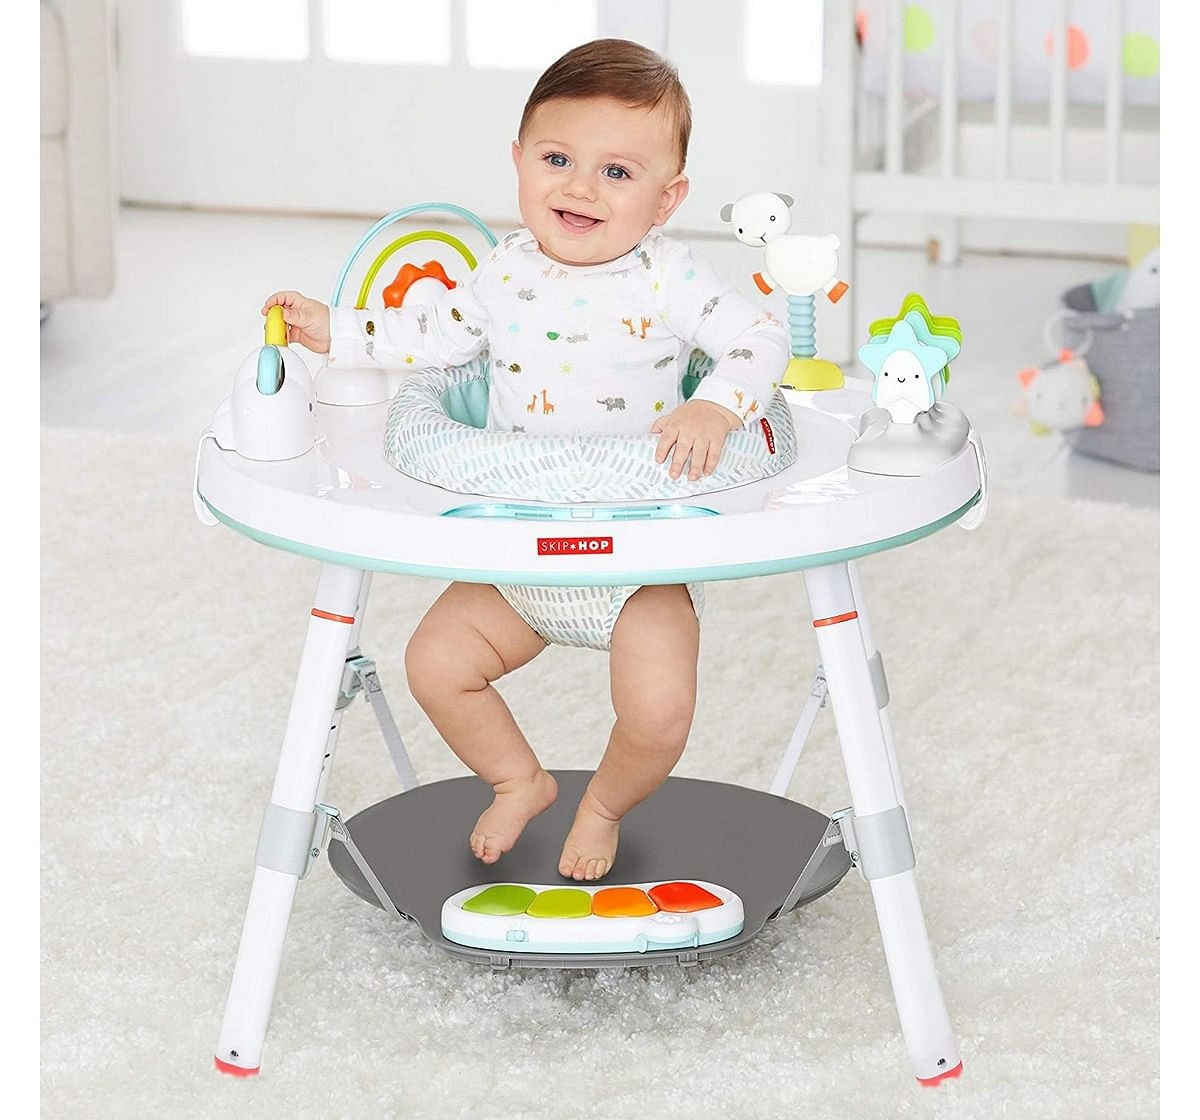 Skip Hop Silver Lining Cloud activity center 3-stage Plastic playtable White 4M+